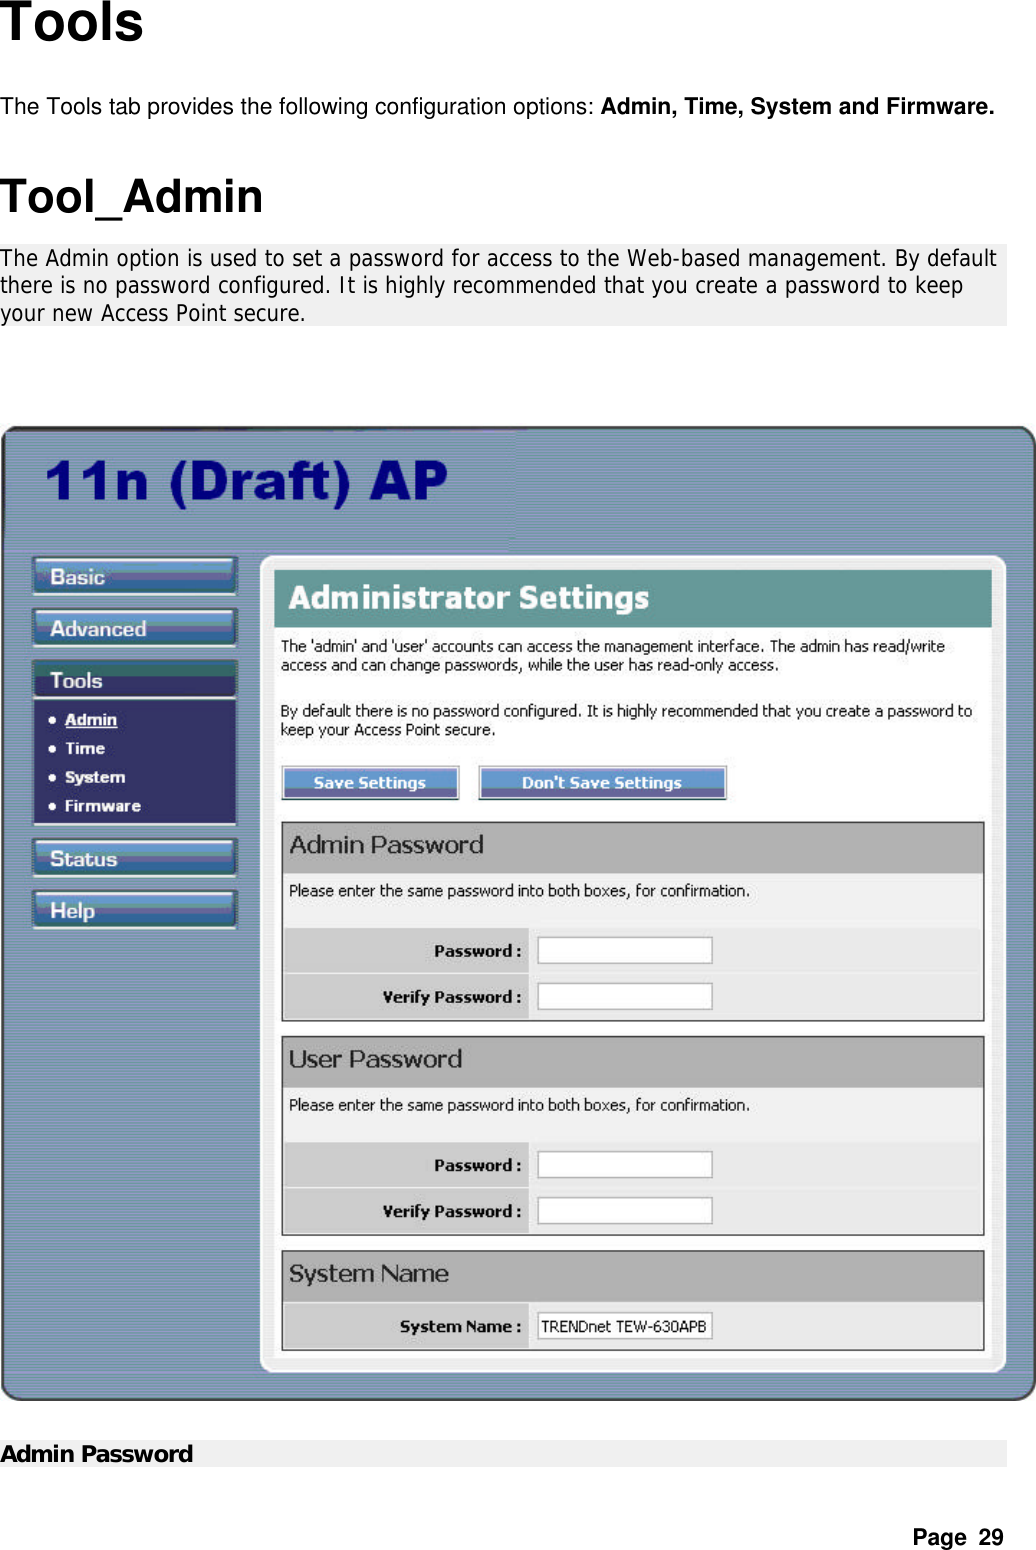 Page  29 Tools The Tools tab provides the following configuration options: Admin, Time, System and Firmware.  Tool_Admin The Admin option is used to set a password for access to the Web-based management. By default there is no password configured. It is highly recommended that you create a password to keep your new Access Point secure.      Admin Password   